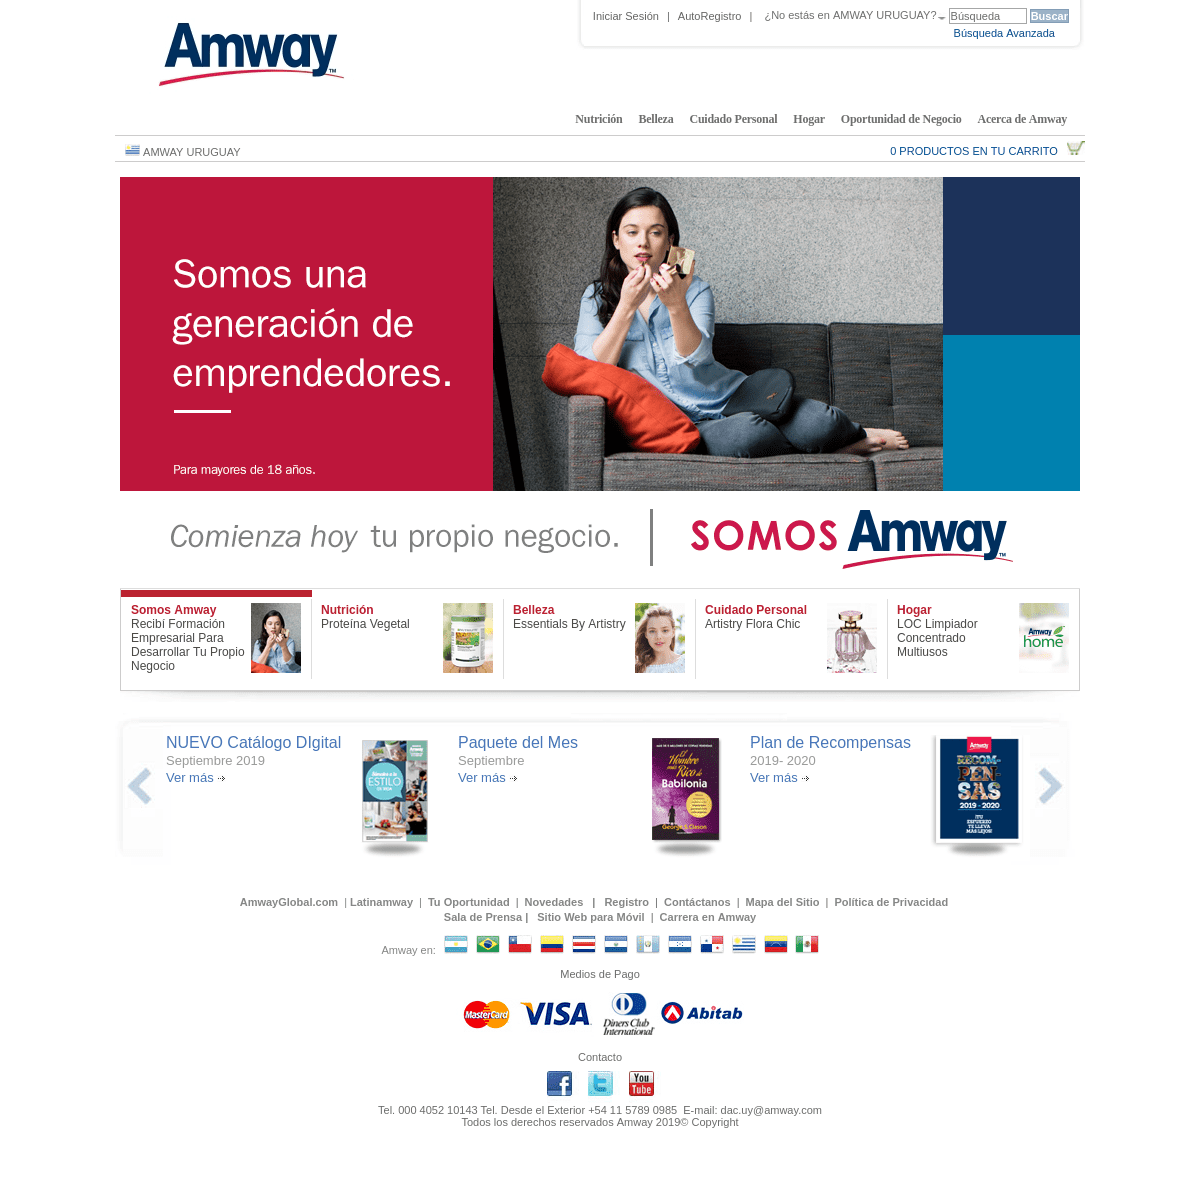 A complete backup of amway.com.uy